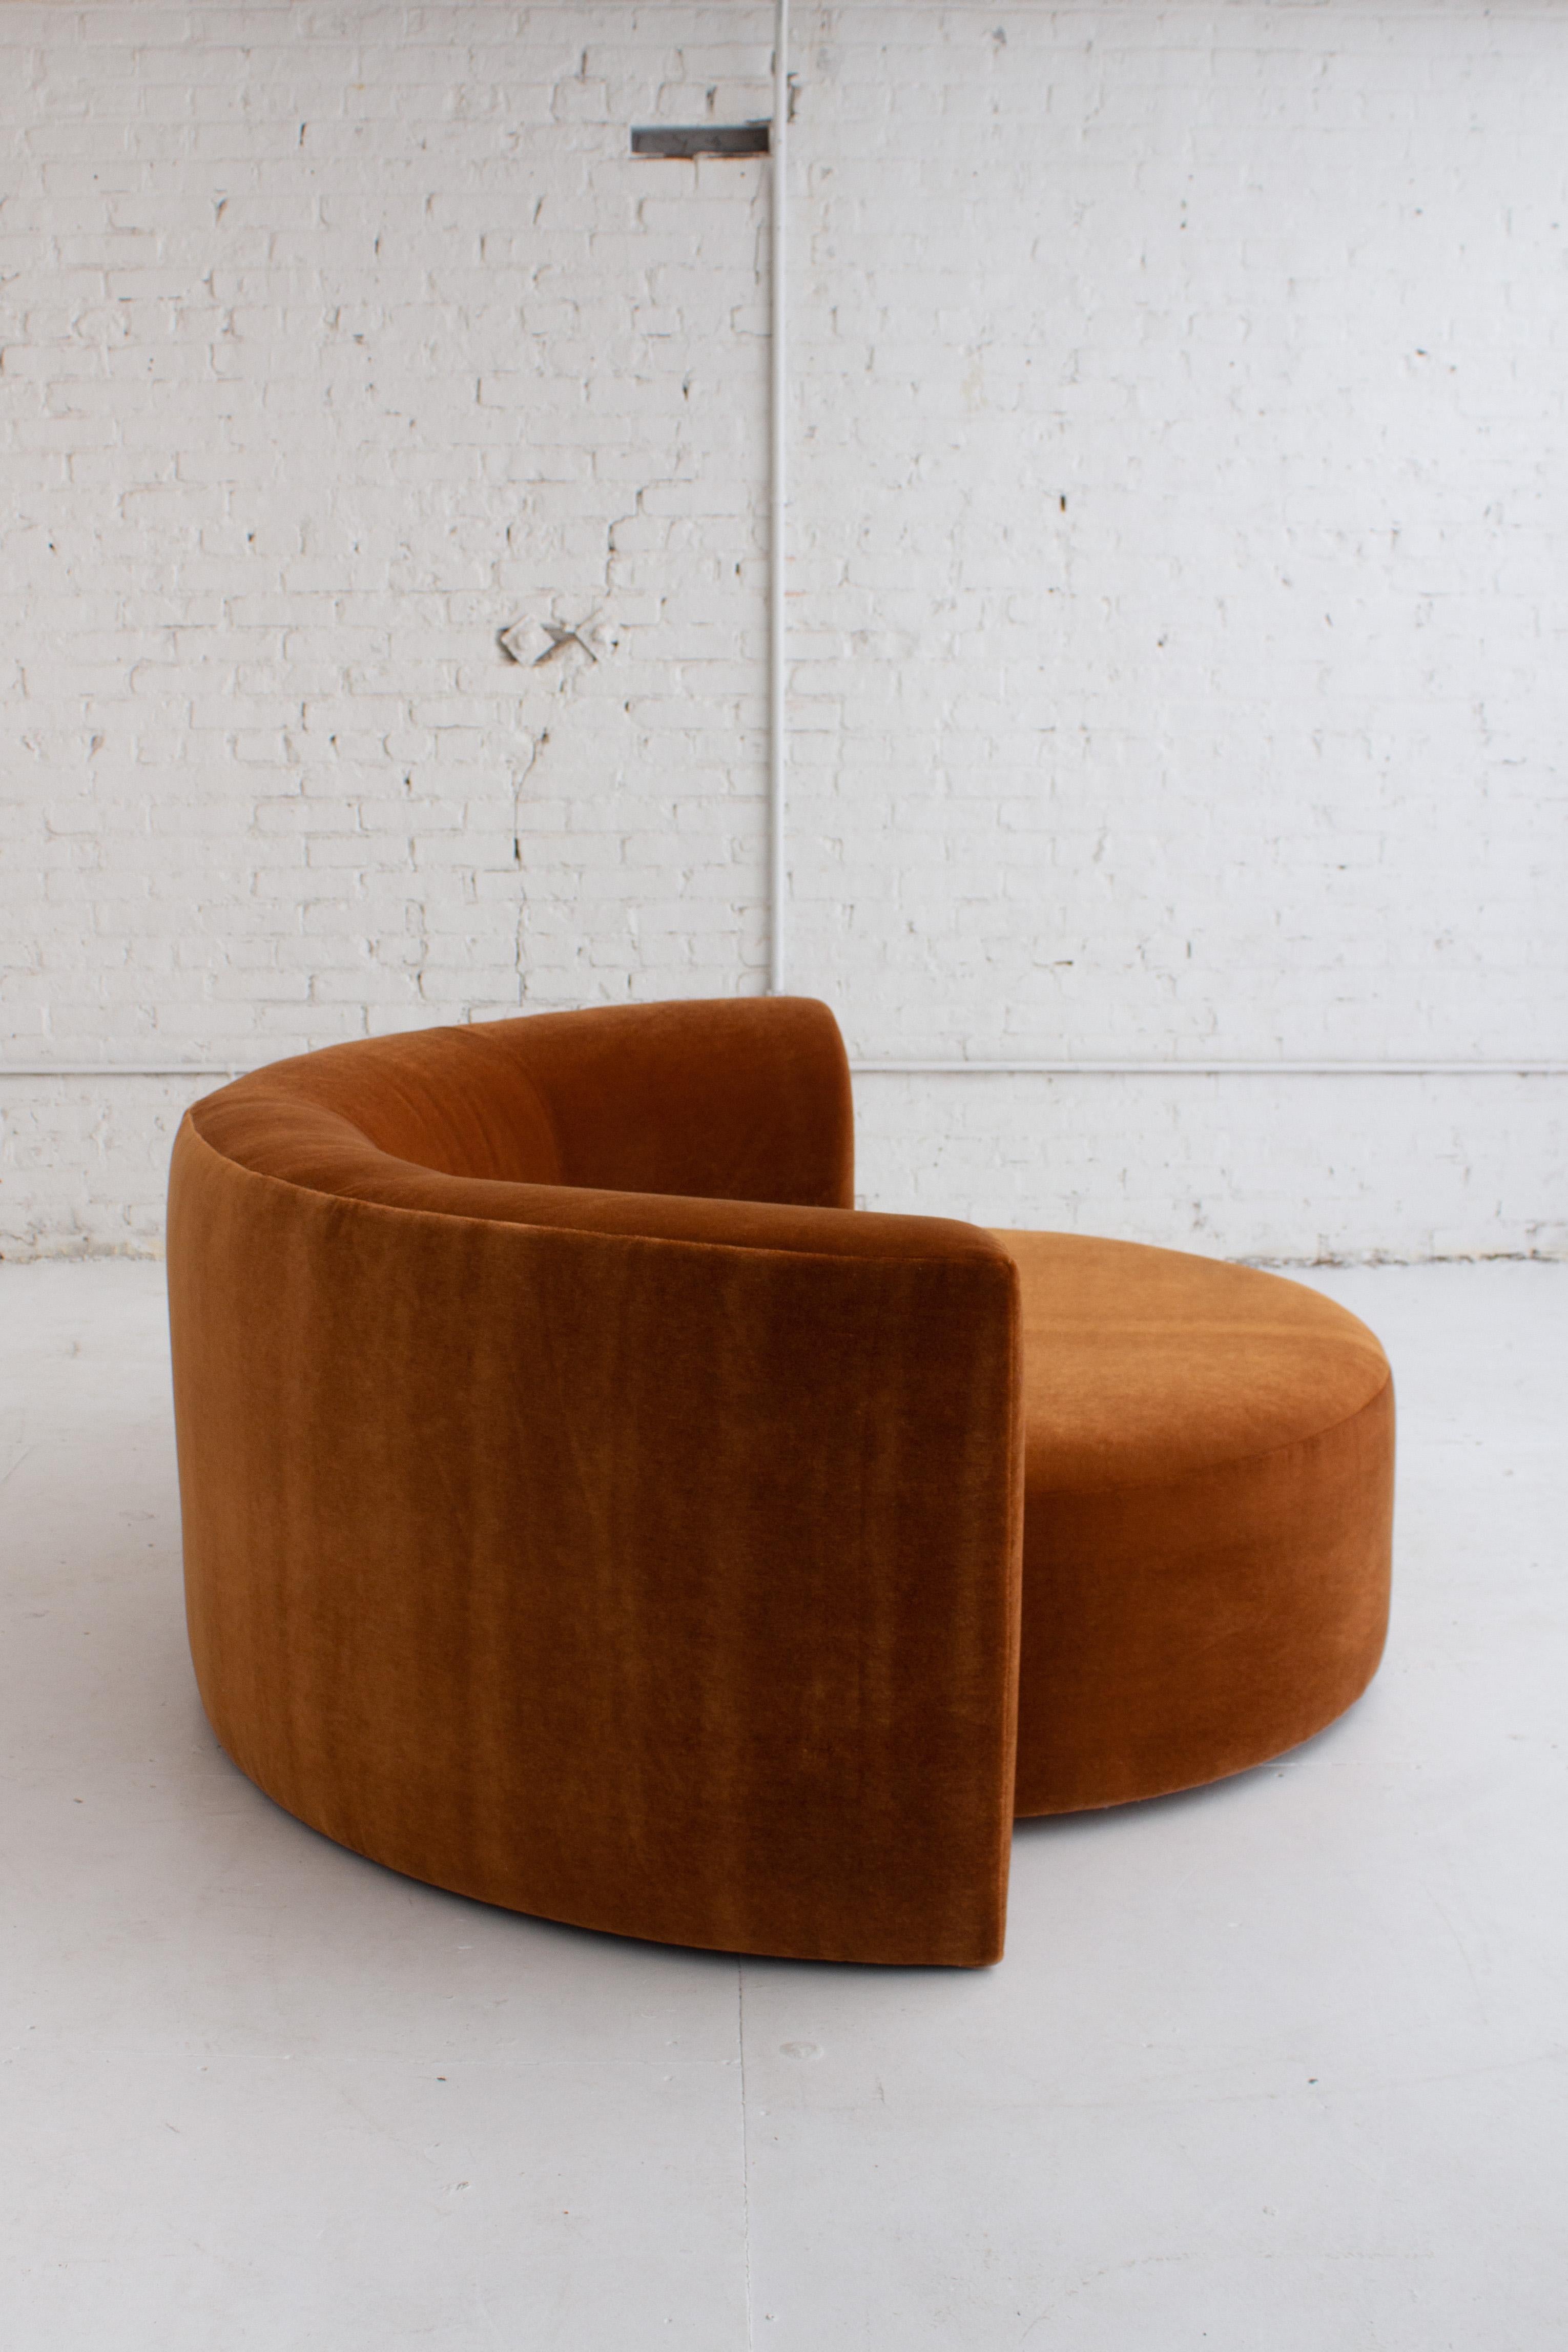 Circular Chaise Lounge in Mohair by Roger Rougier For Sale 1